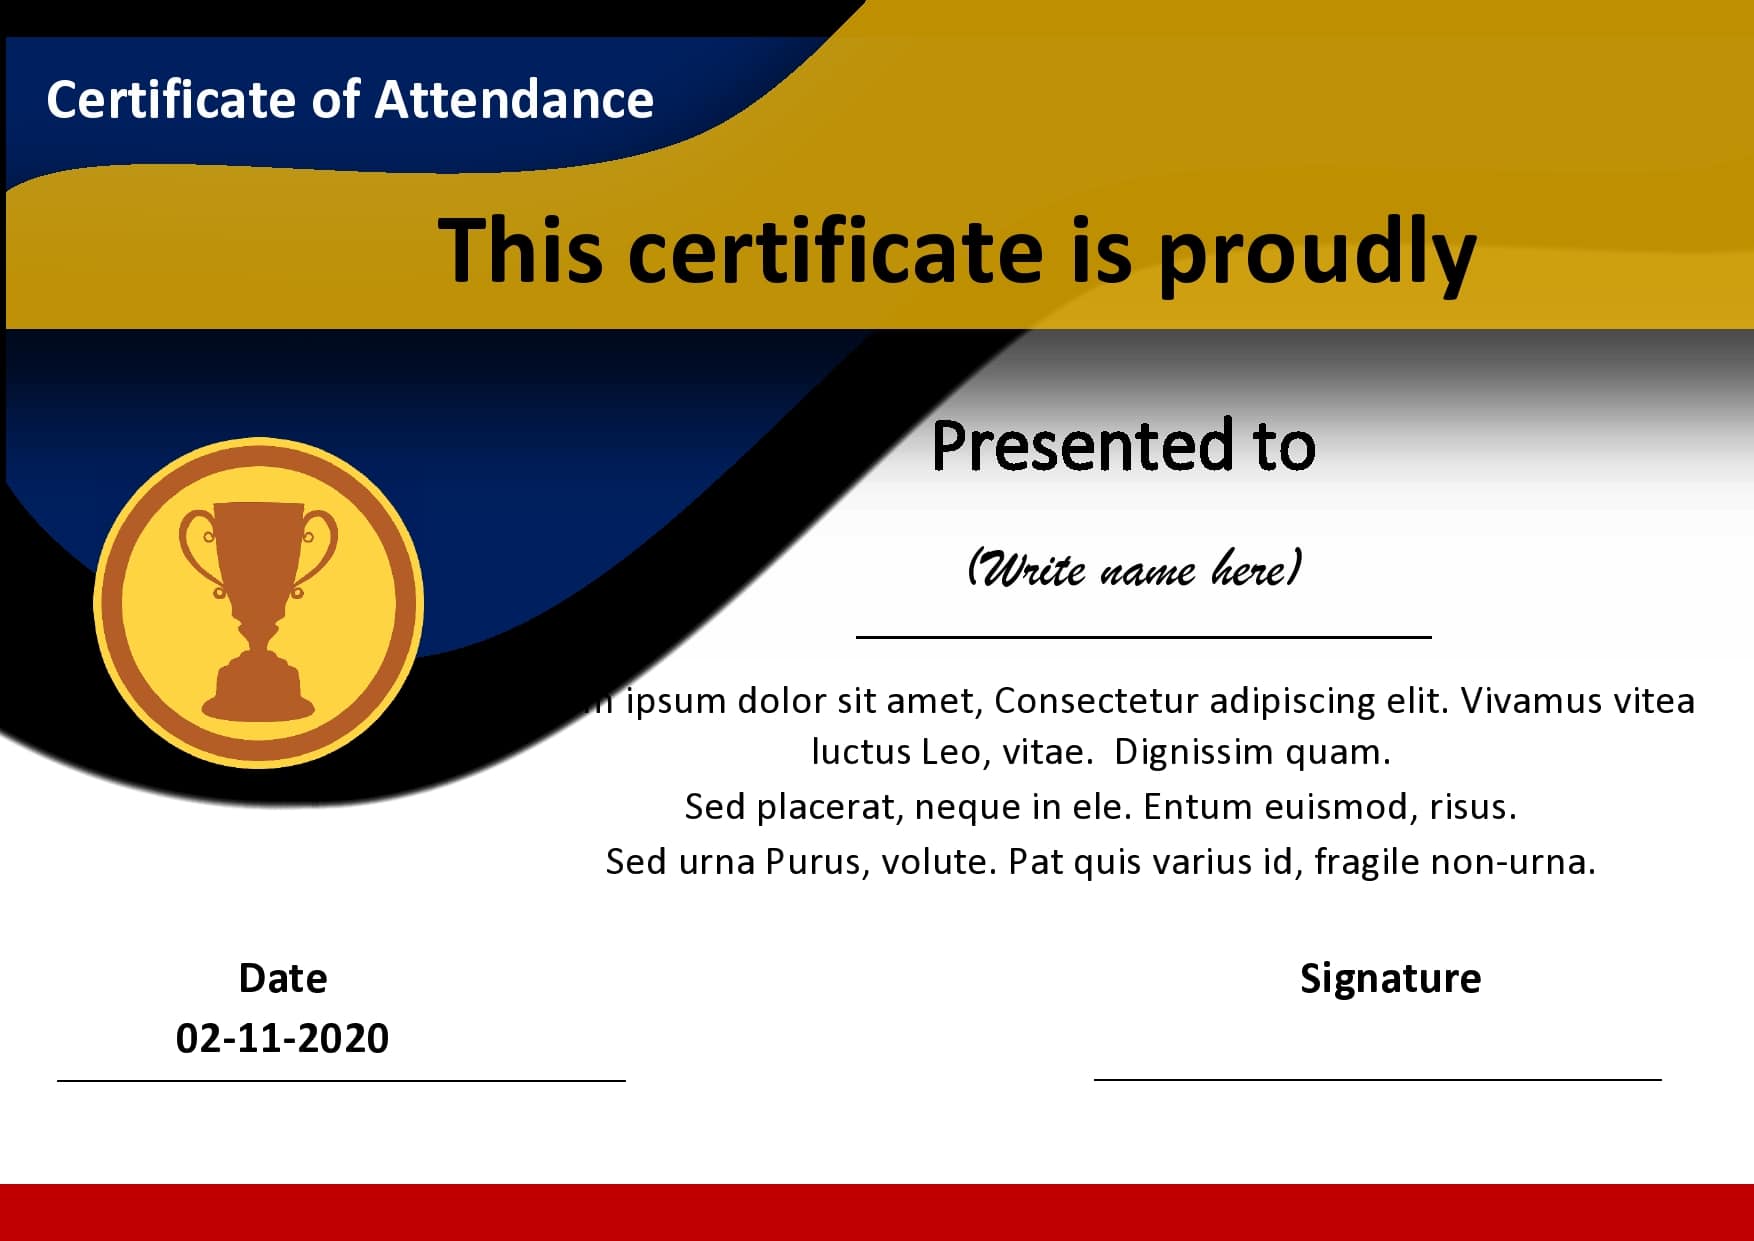 20 Free Certificates of Attendance Templates (Word) Intended For Certificate Of Attendance Conference Template